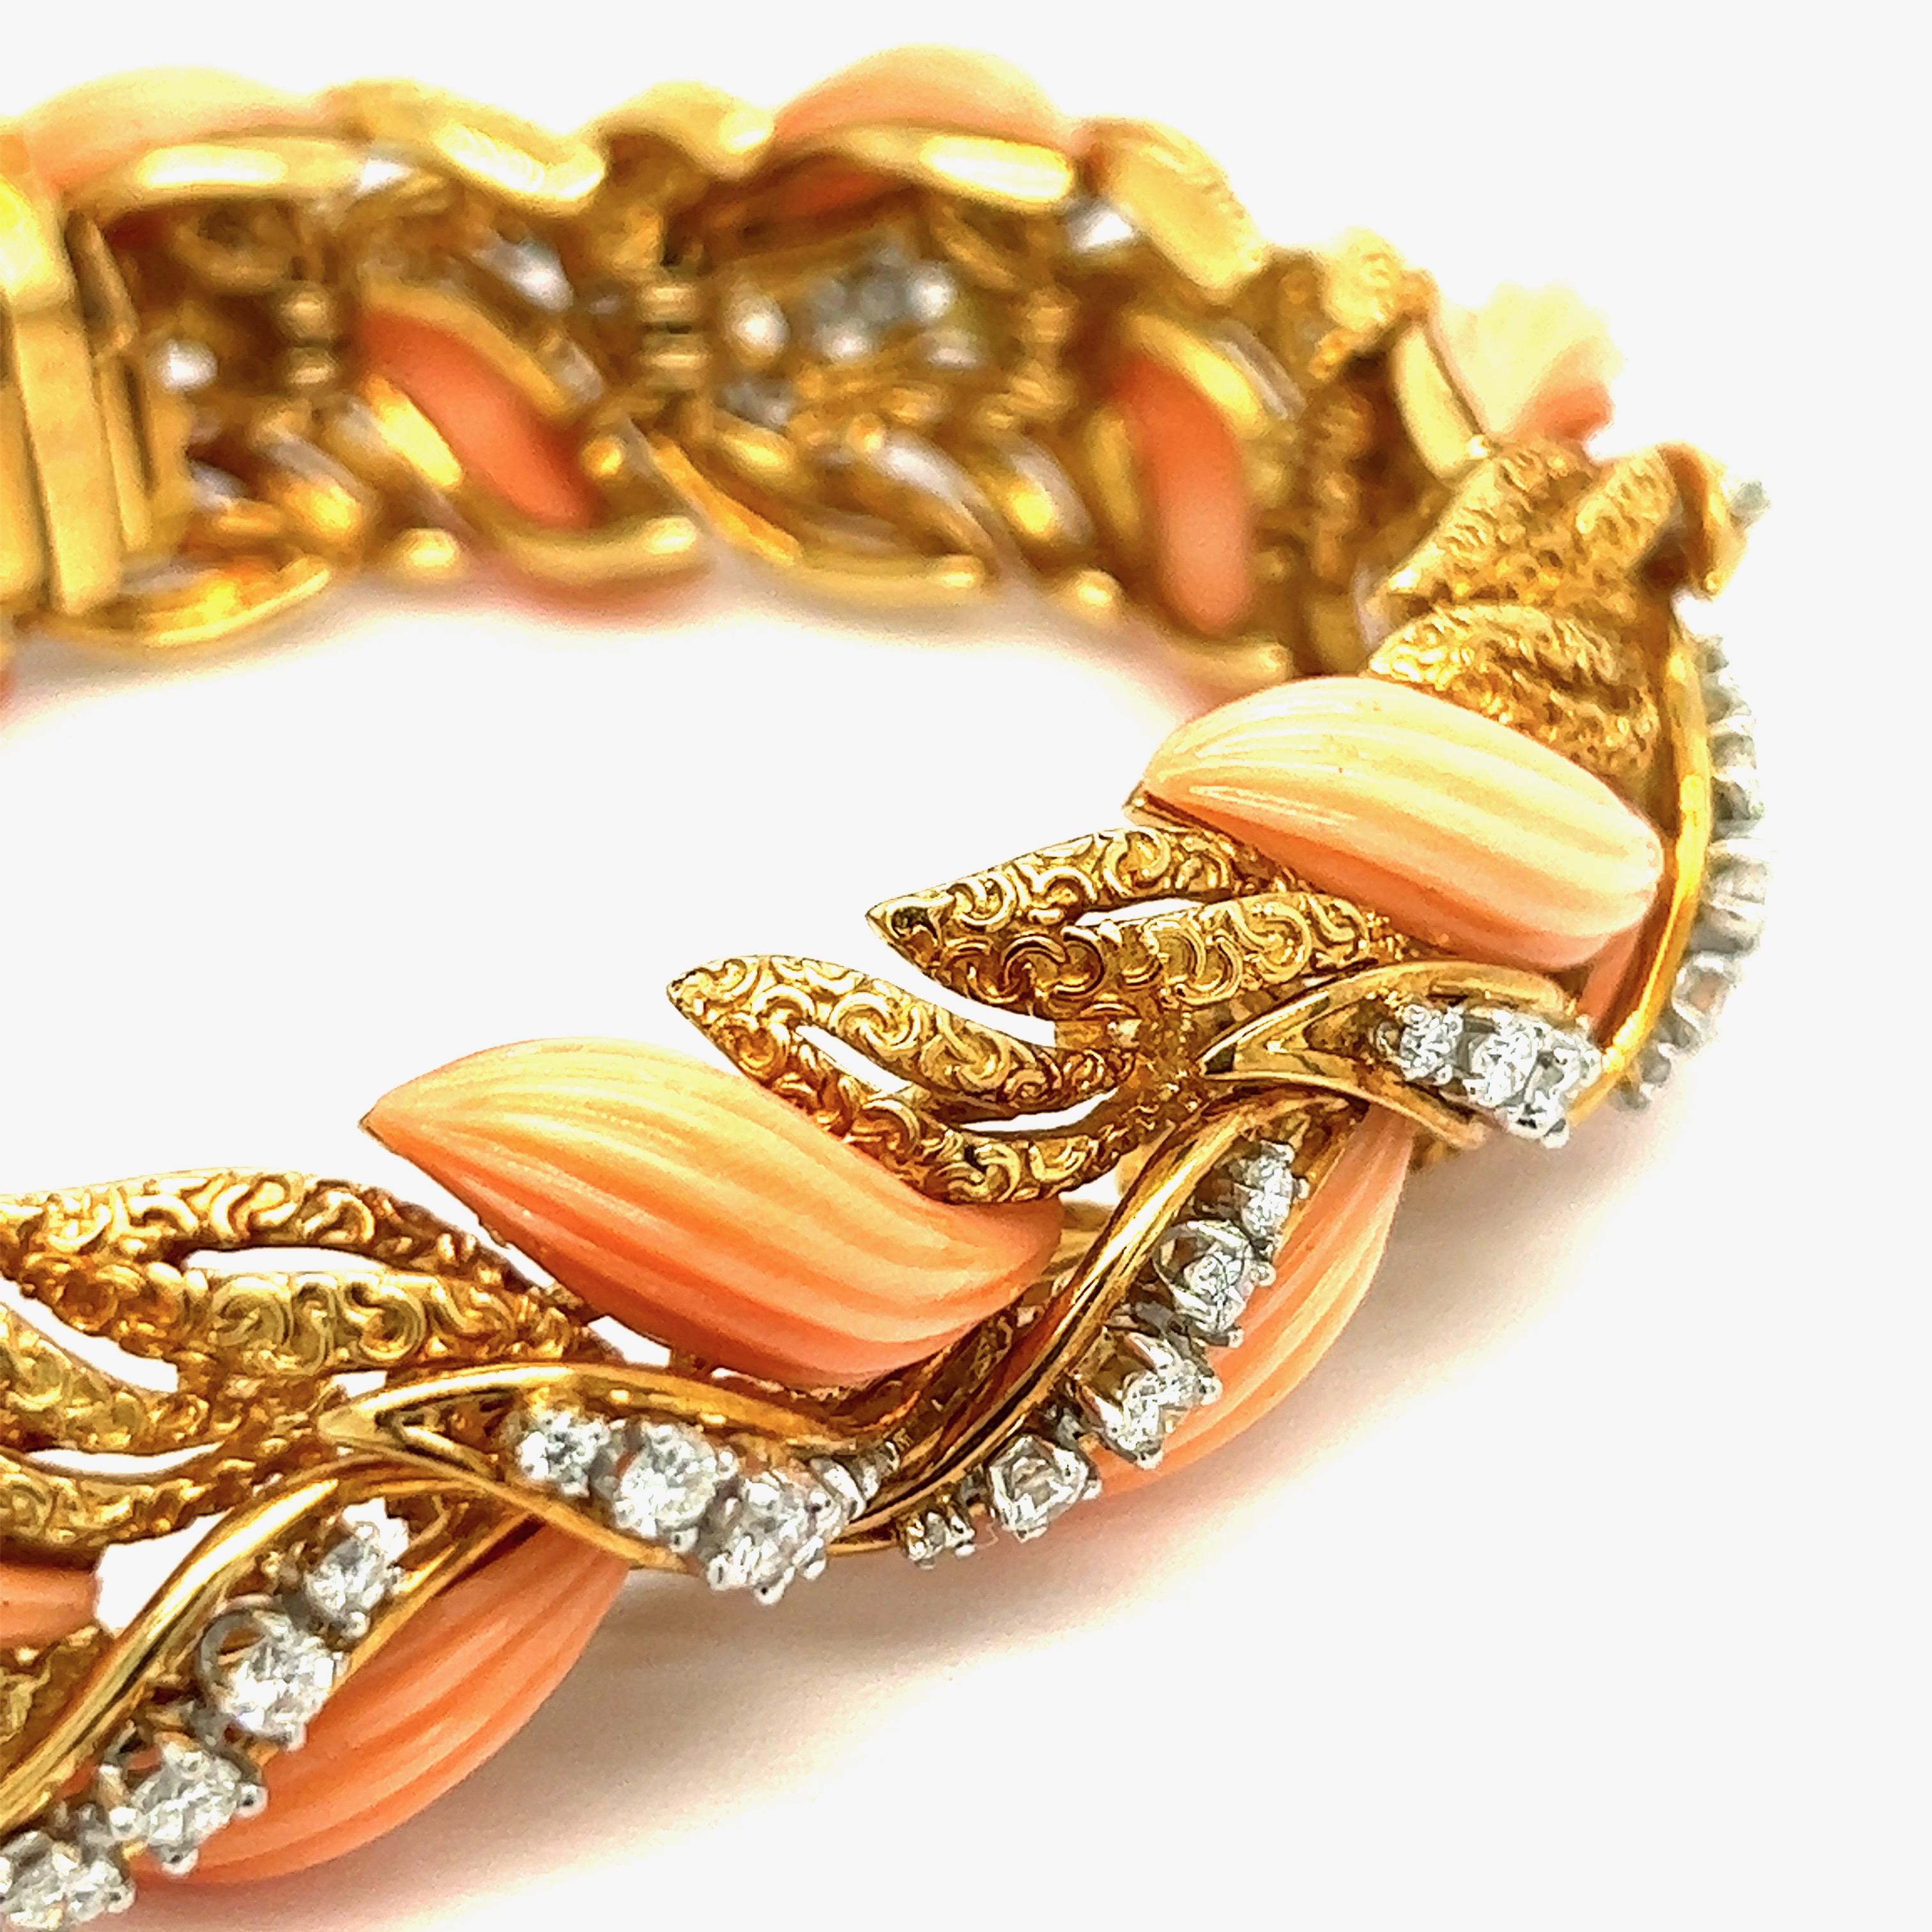 Van Cleef & Arpels Angel Skin Coral Diamond Bracelet In Excellent Condition For Sale In New York, NY